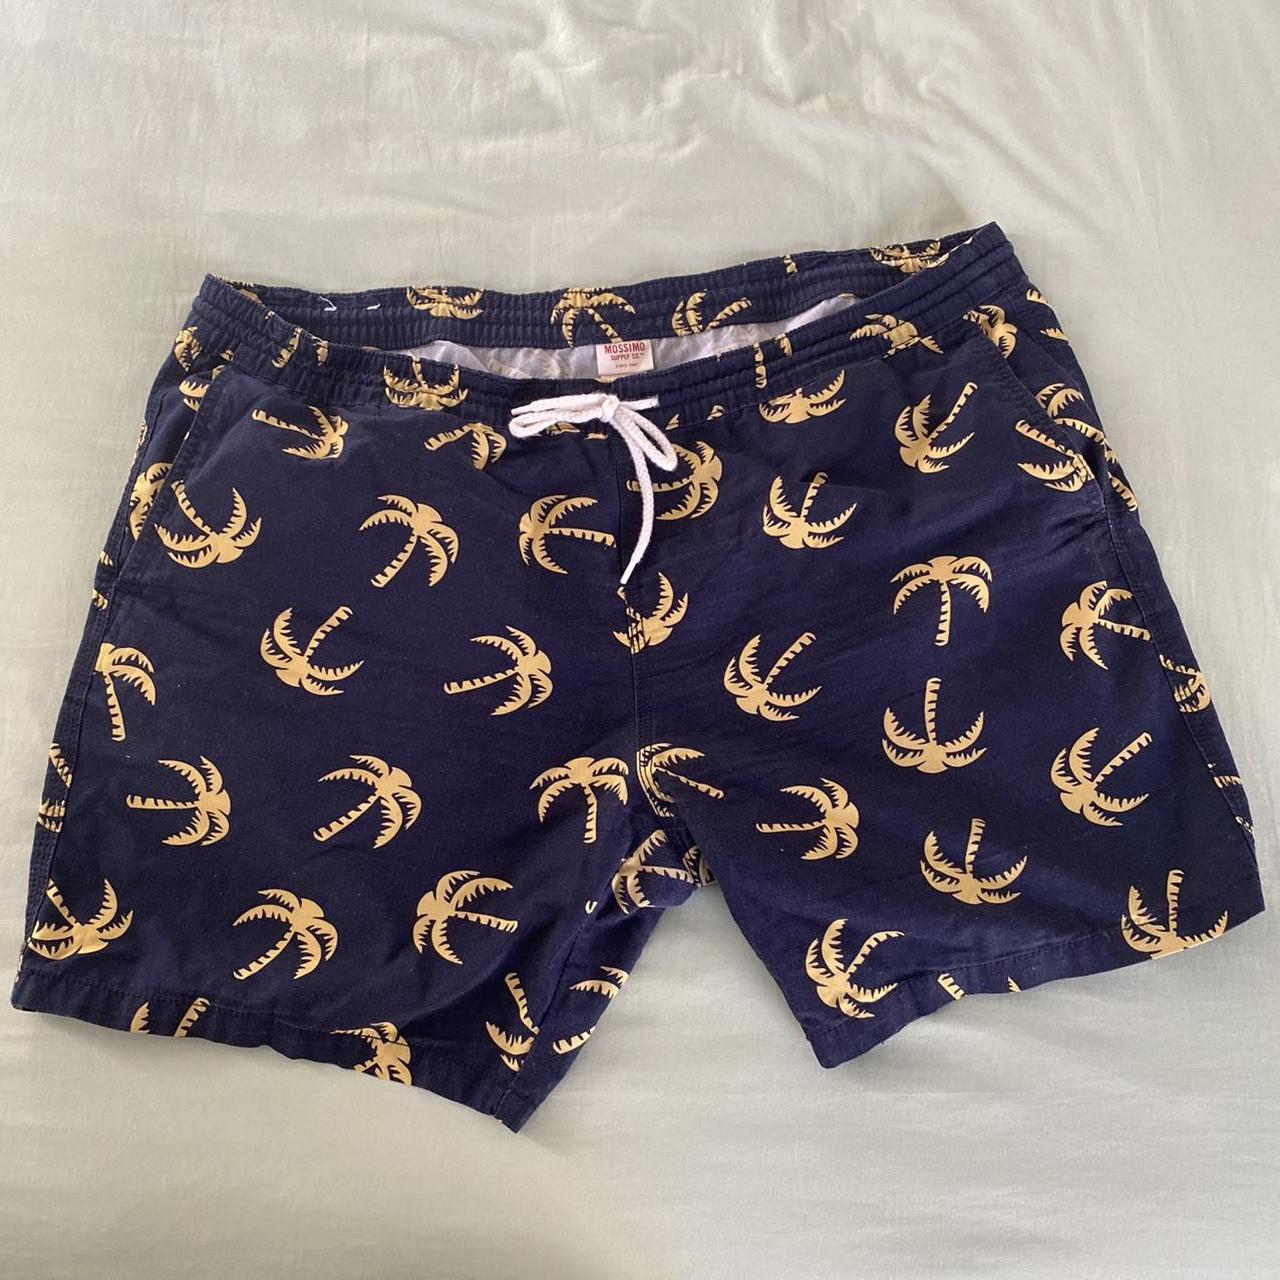 Mossimo Men's Navy and Yellow Shorts